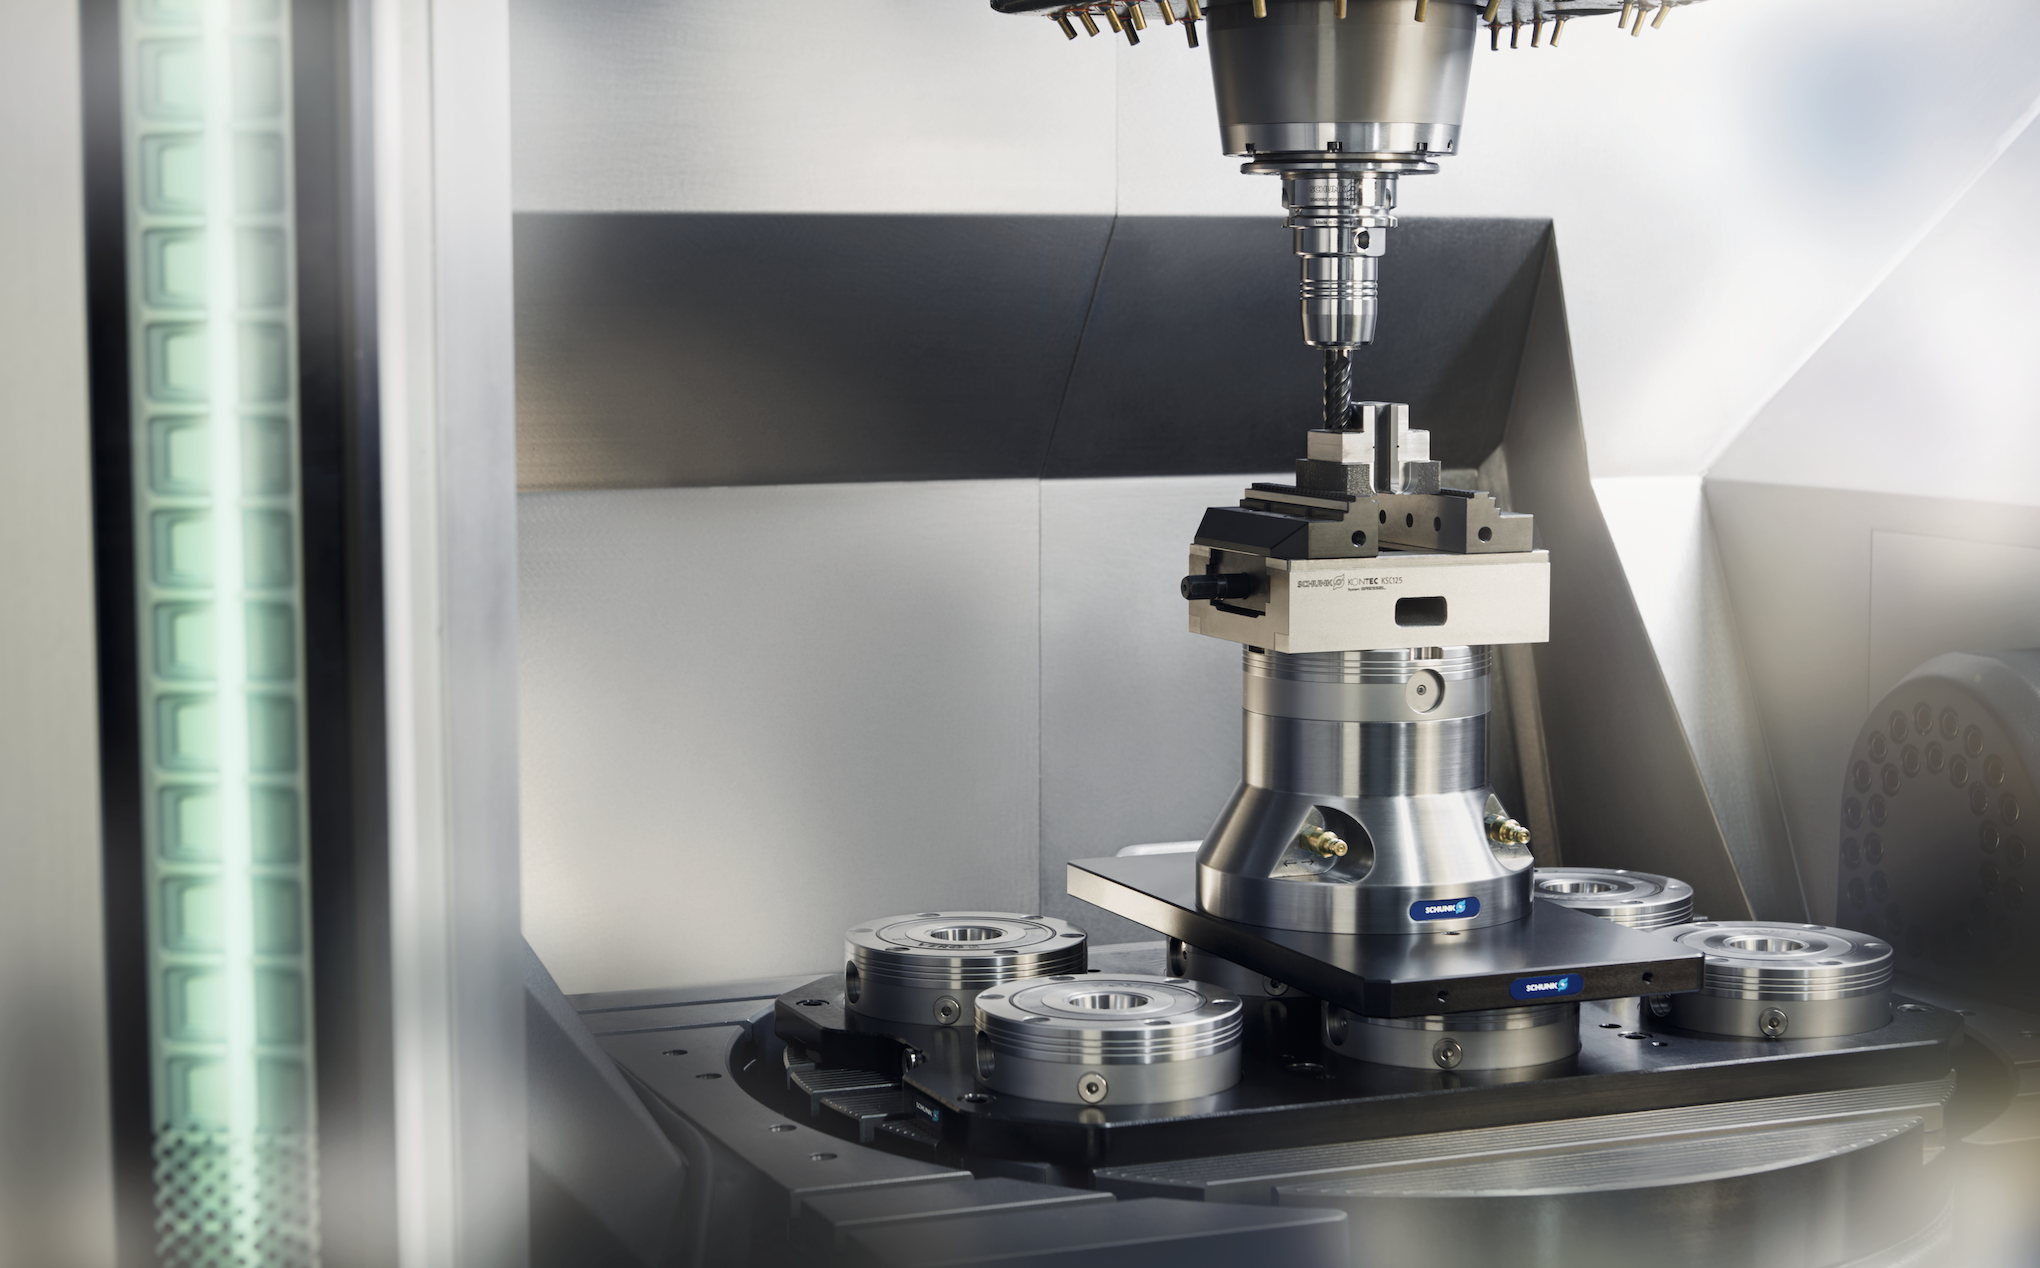 Schunk’s VERO-S zero-point system offers locational repeatability of &lt; 5 μm (0.0002&quot;) or better and can be used with vises, fixtures, pallets and individual workpieces (image courtesy of Schunk).